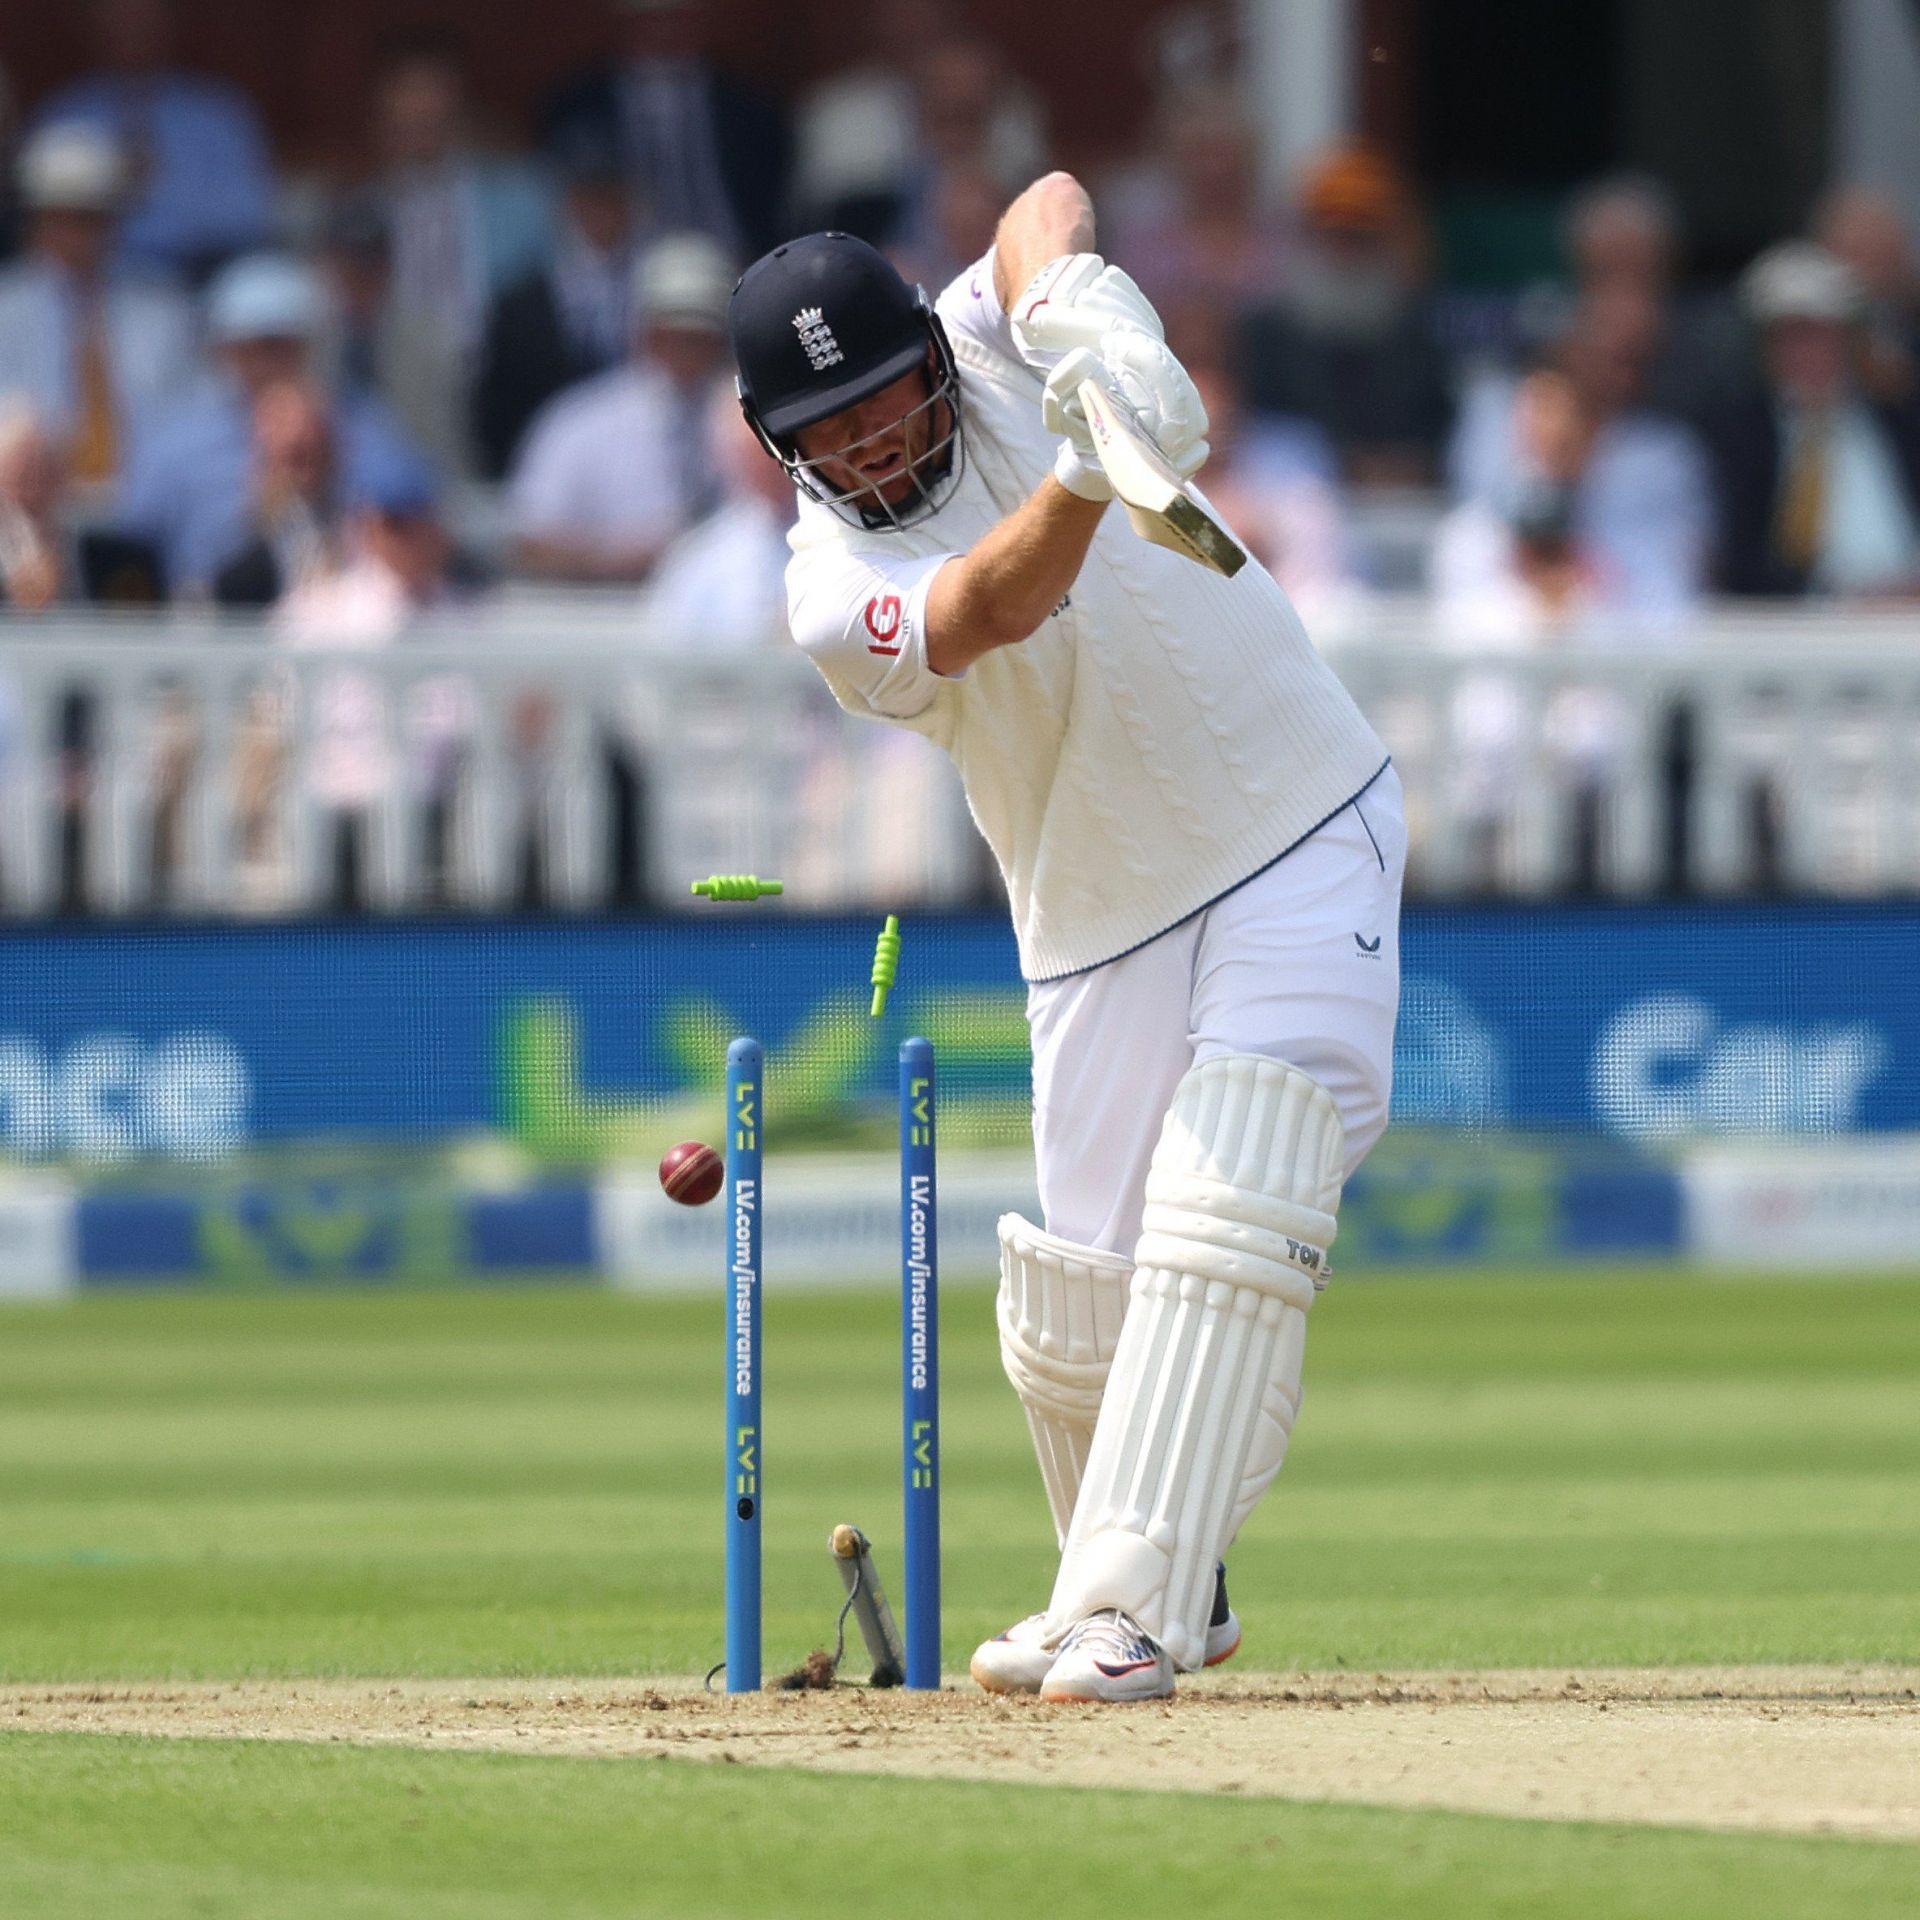 Anrich Nortje cleans up Jonny Bairstow as England are left reeling at lunch on Day One of the first Test.